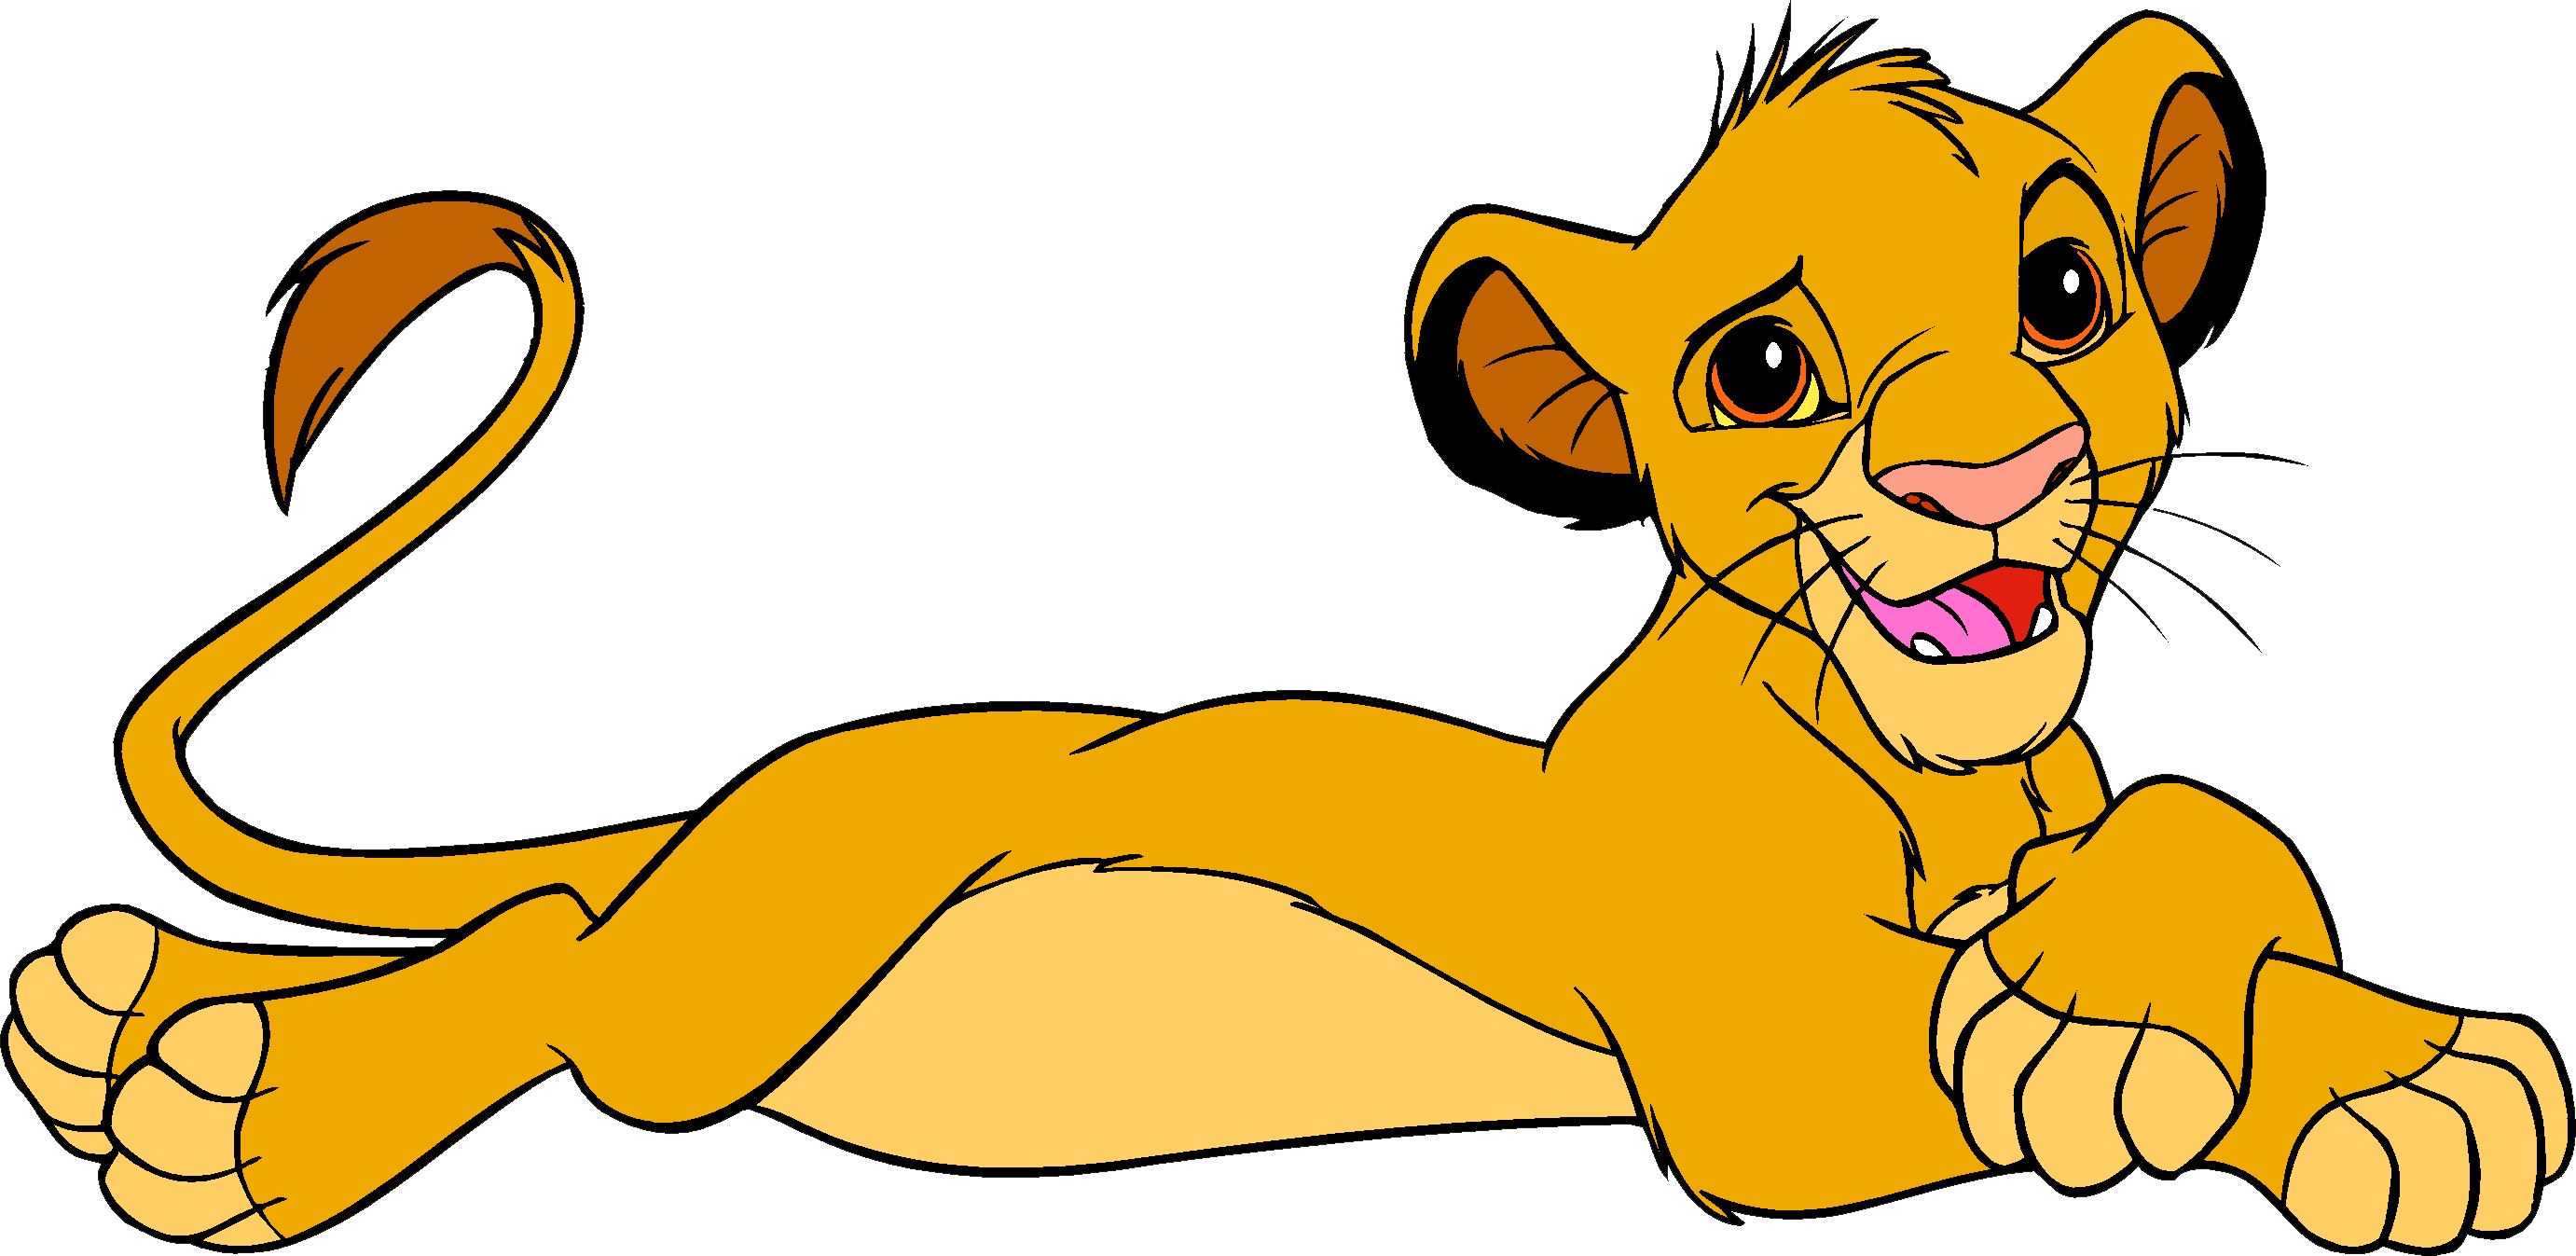 Clipart lion simba. King png images free